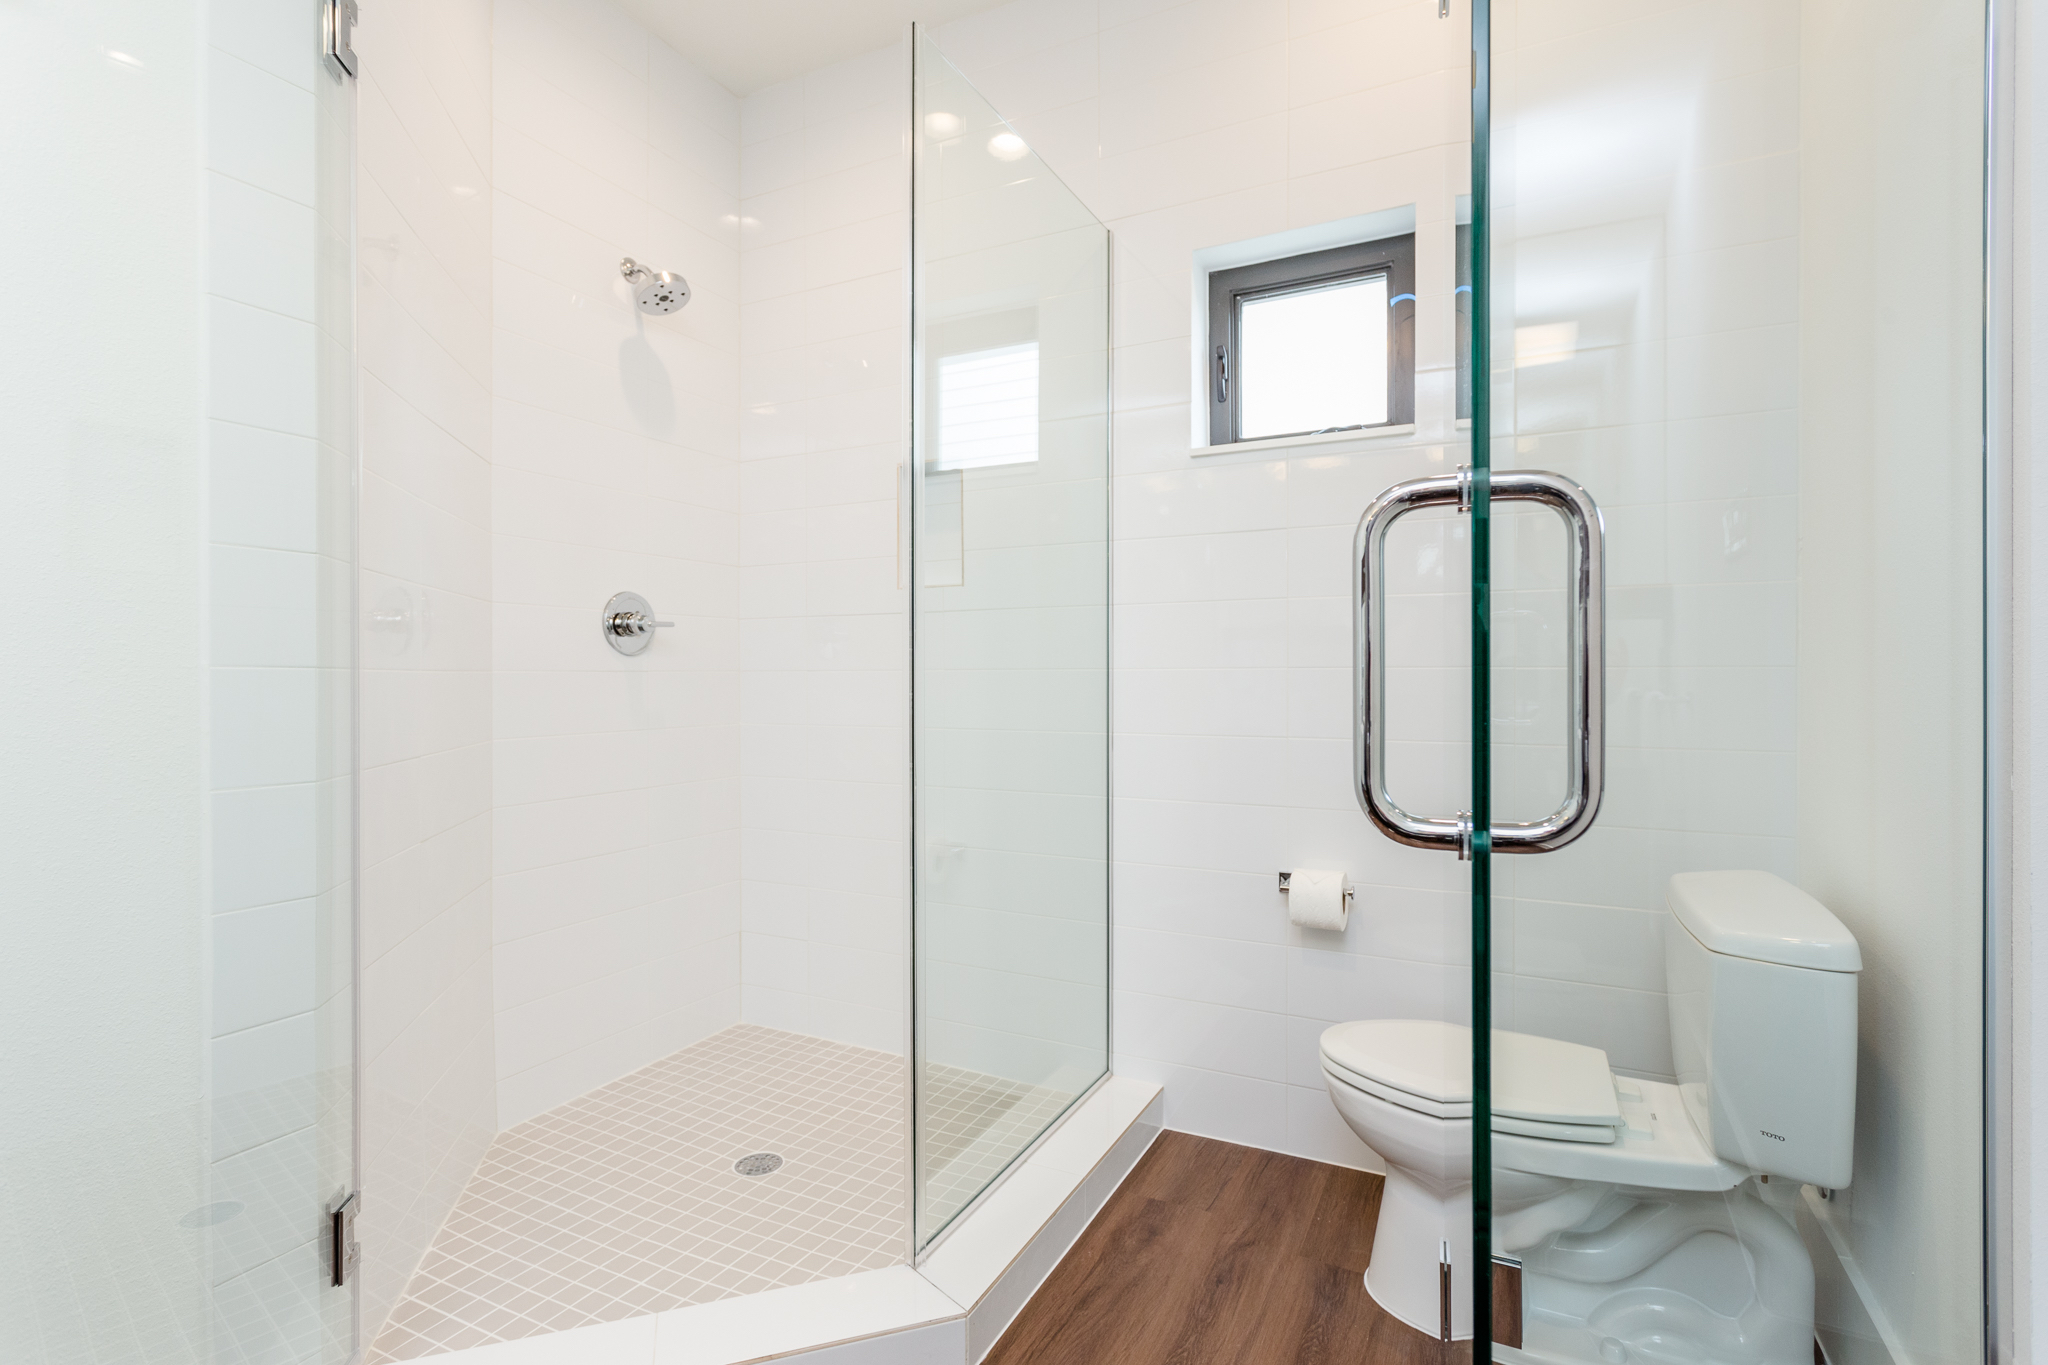  A frameless glass enclosure separates the shower from the water closet. Glass will be frosted to allow for enhanced privacy. 